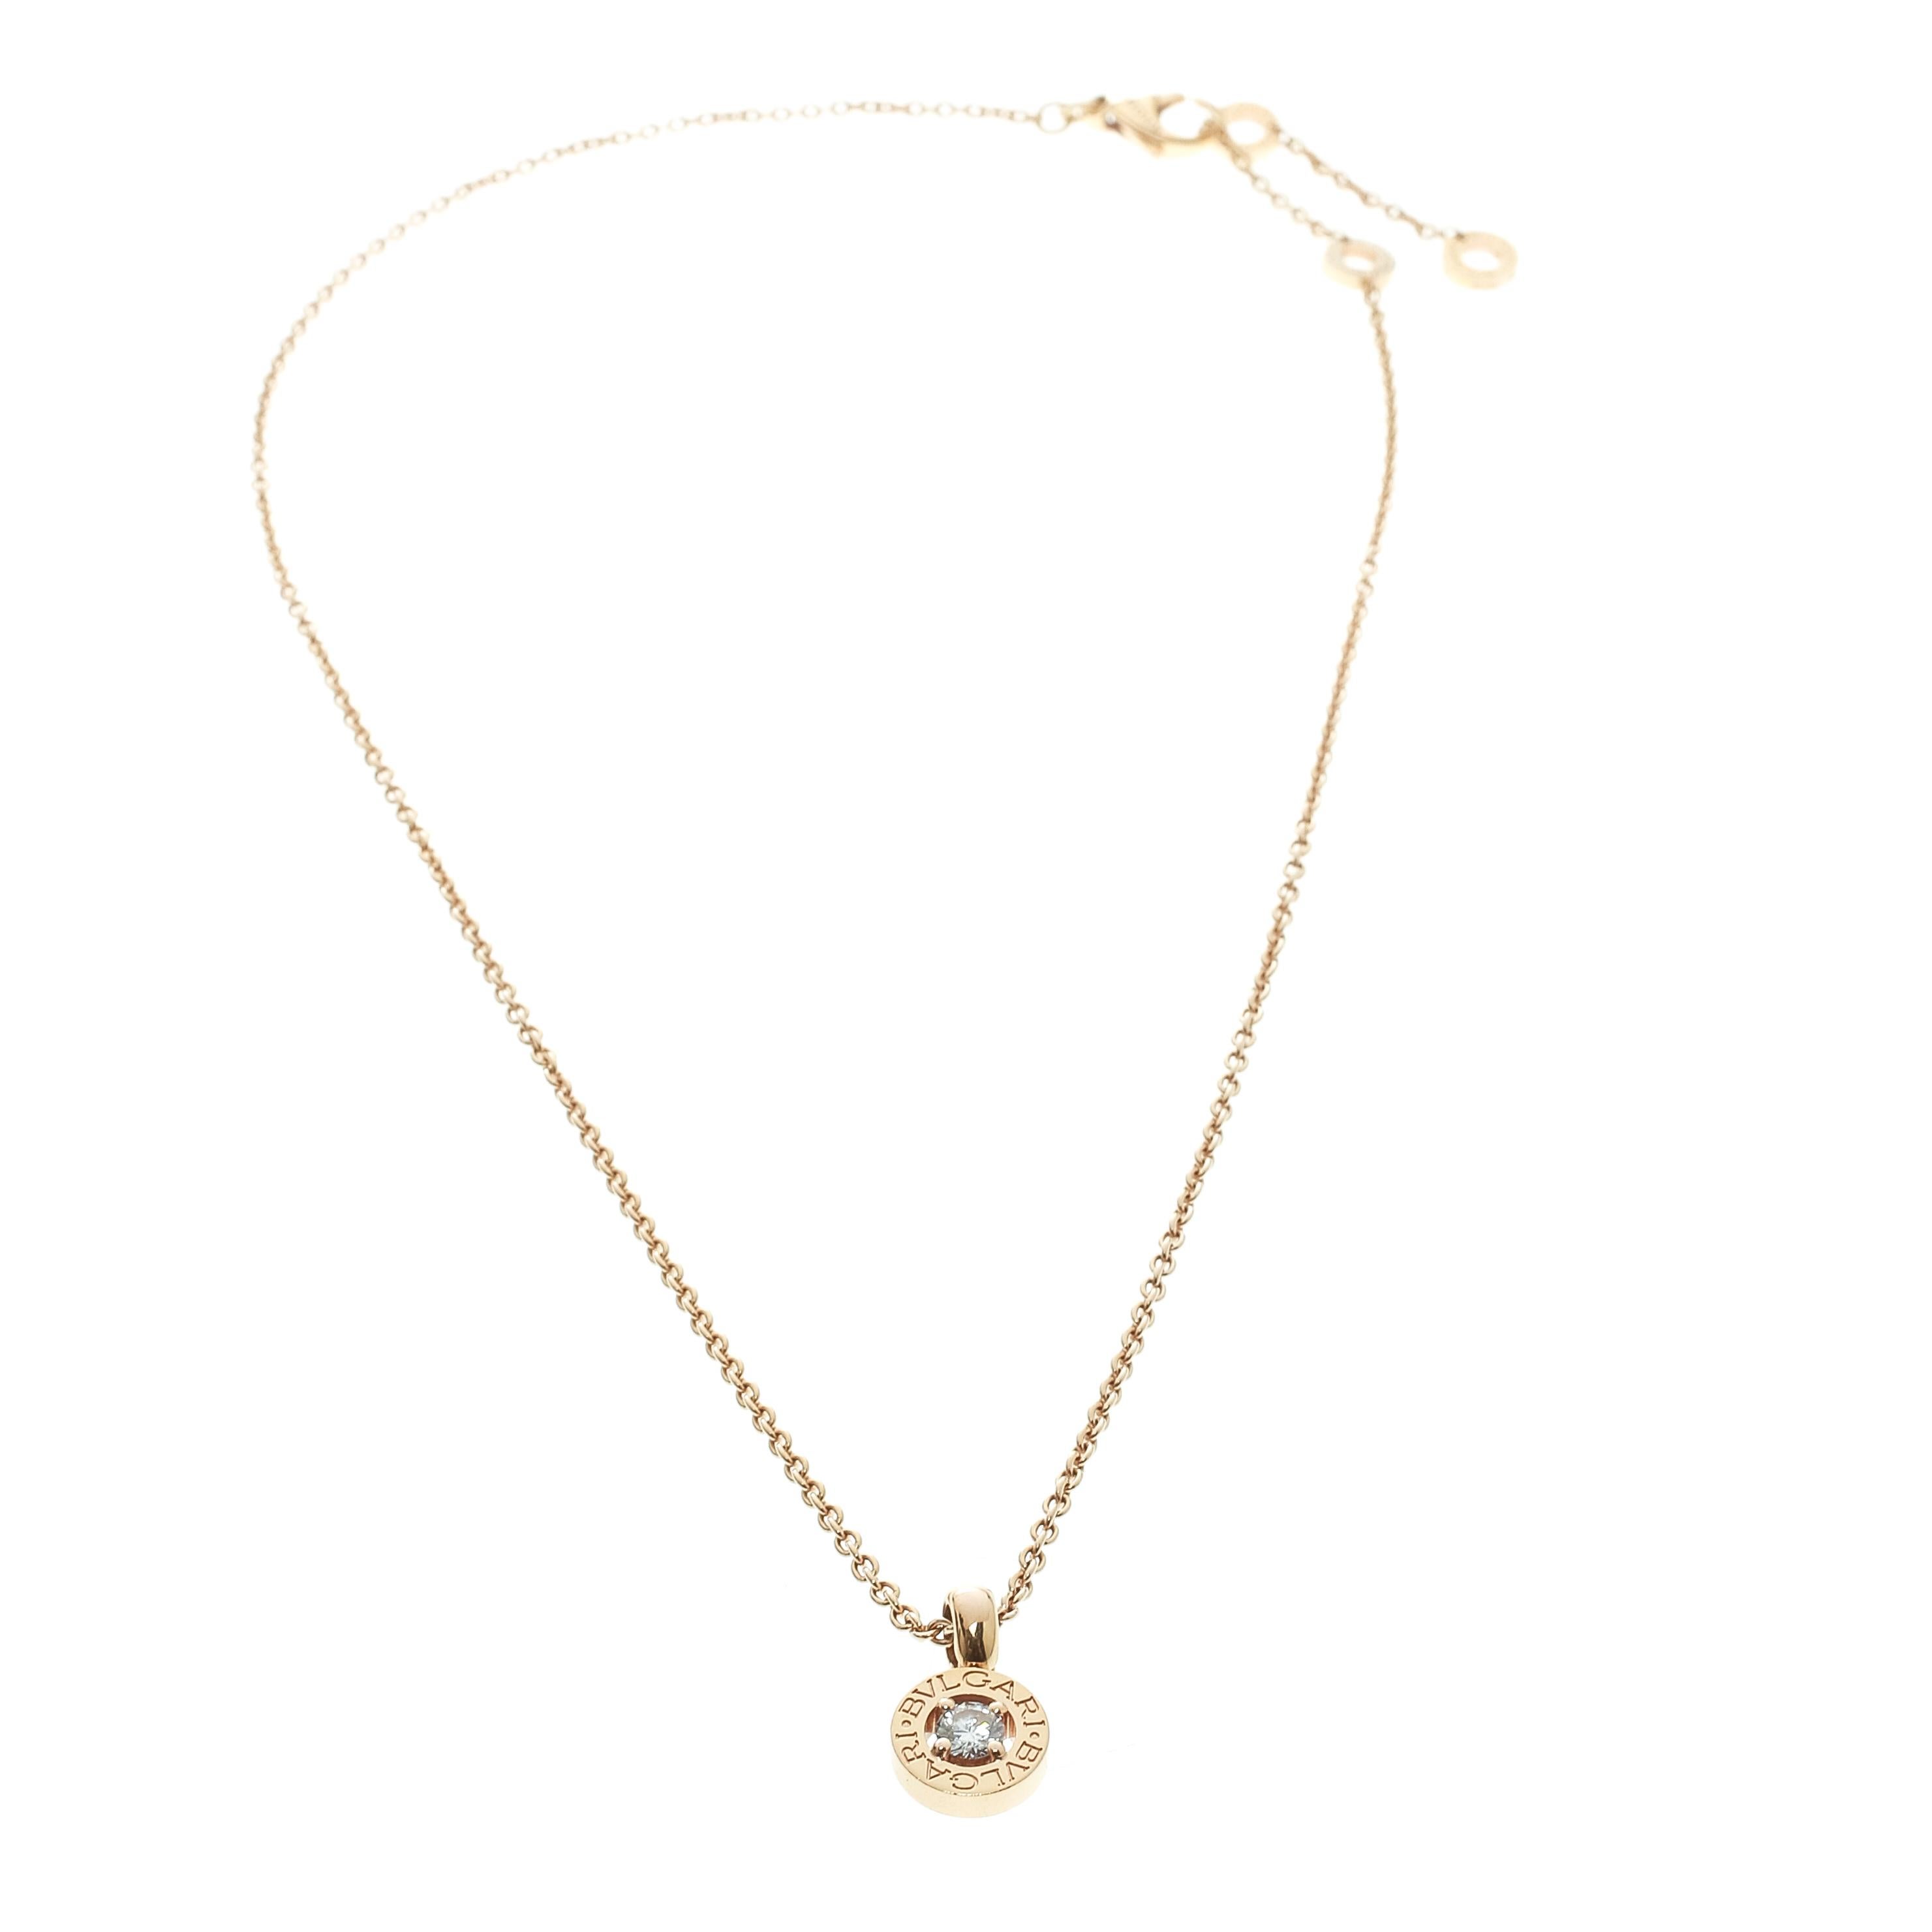 This gorgeous necklace from Bvlgari is an expression of elegance and subtle charm. It is sculpted in 18k rose gold and is centered by a gold ring engraved with twin logos, inspired by the inscriptions on the ancient coins, and is framed by a round